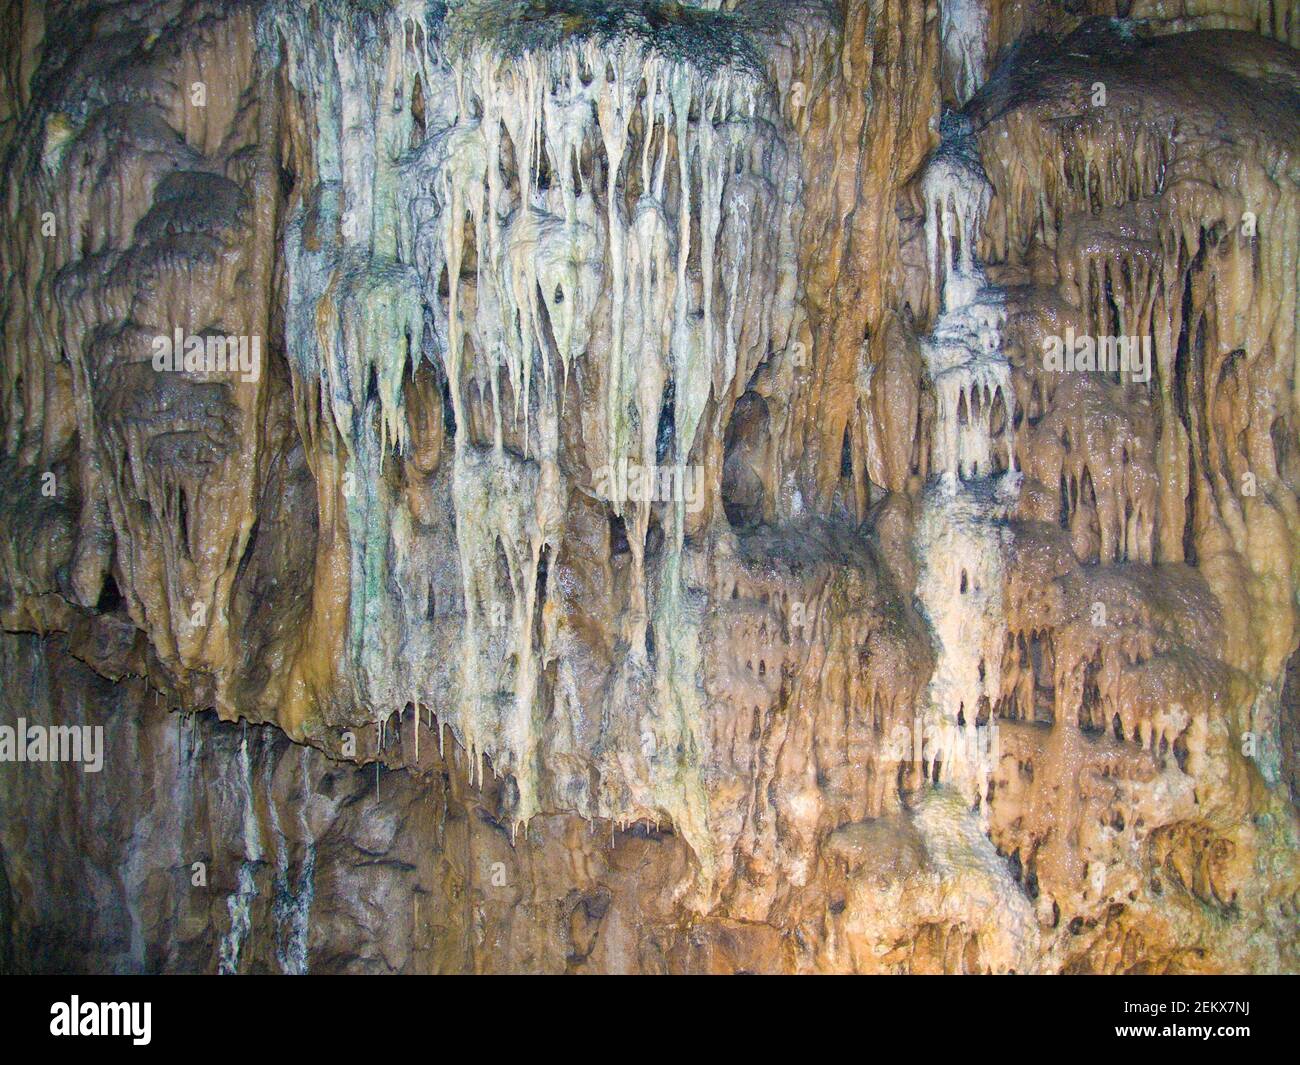 stalactites covering the wall of a cave, melting, icicles, creepy, water dripping, mineral formations Stock Photo